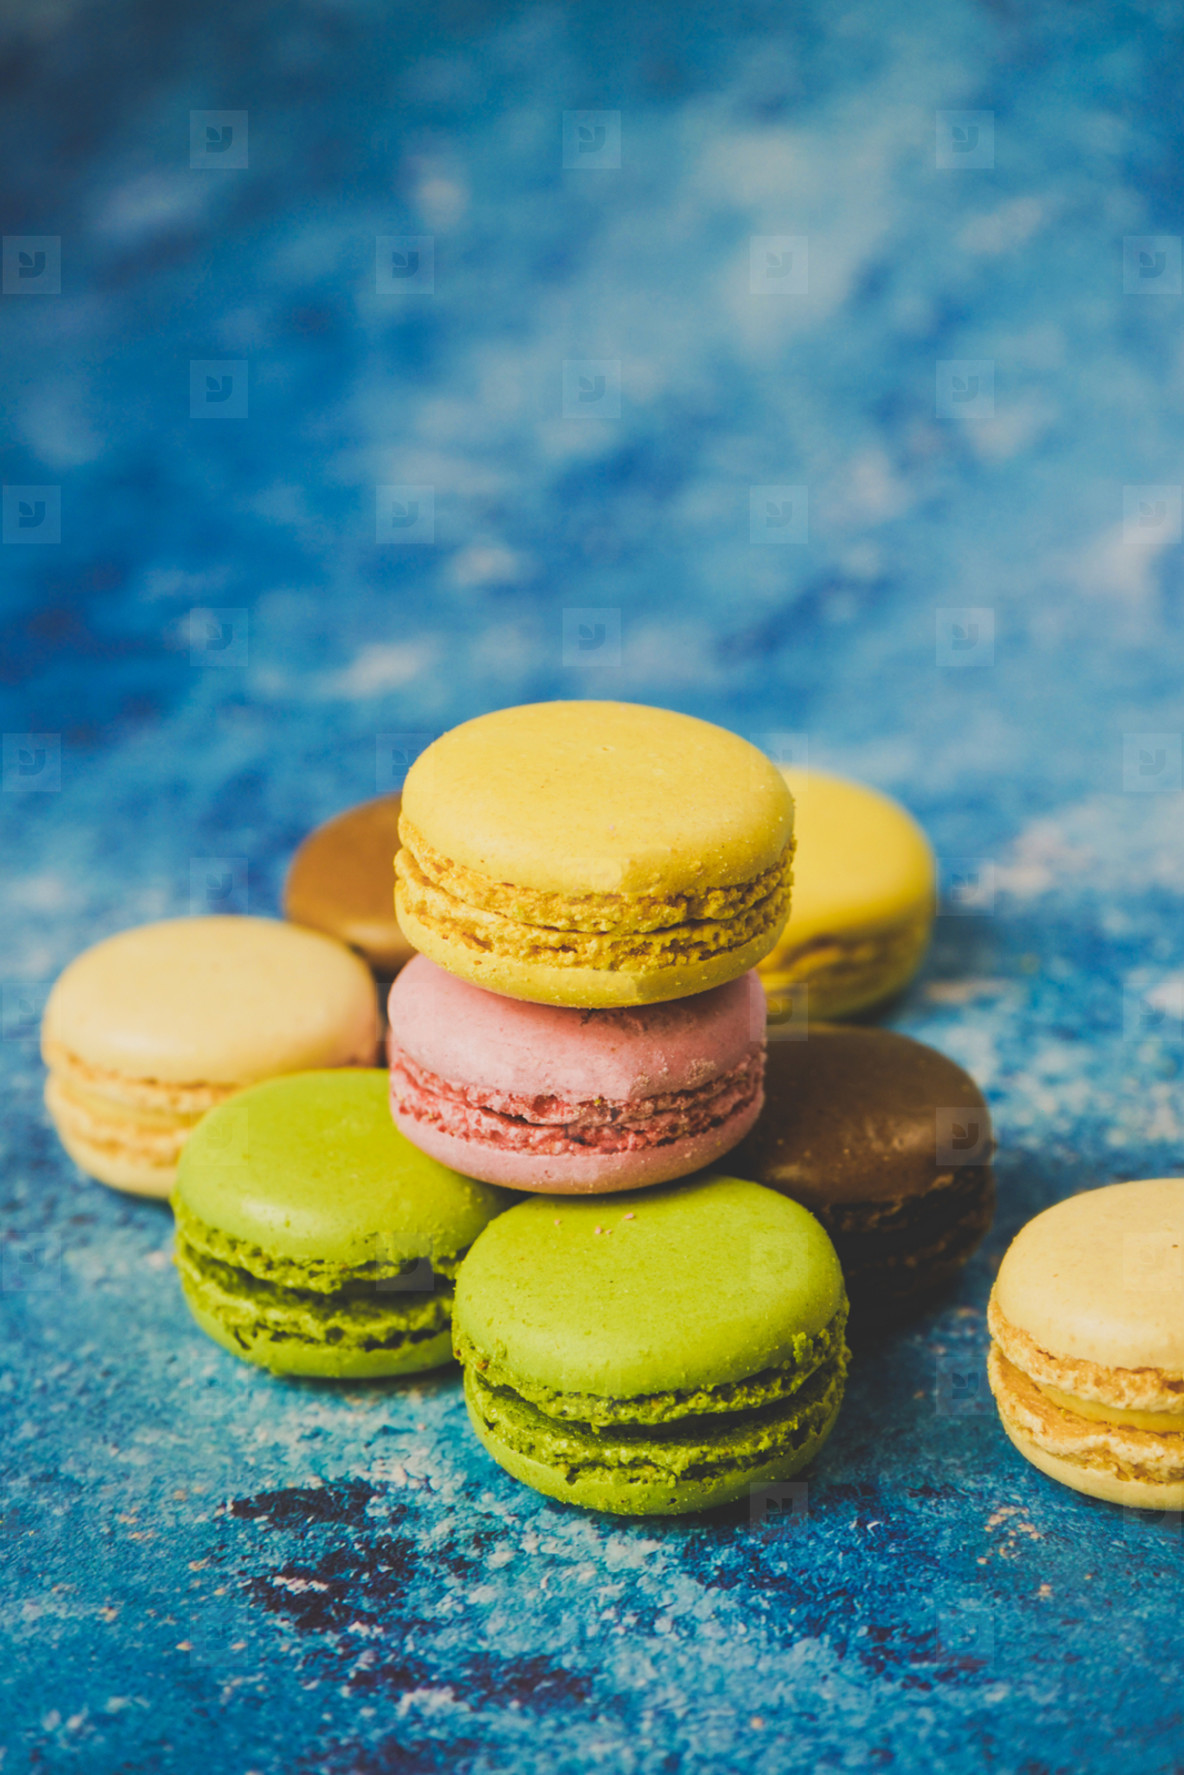 Photos Variety Of Colorful Macarons Over A Blue Background